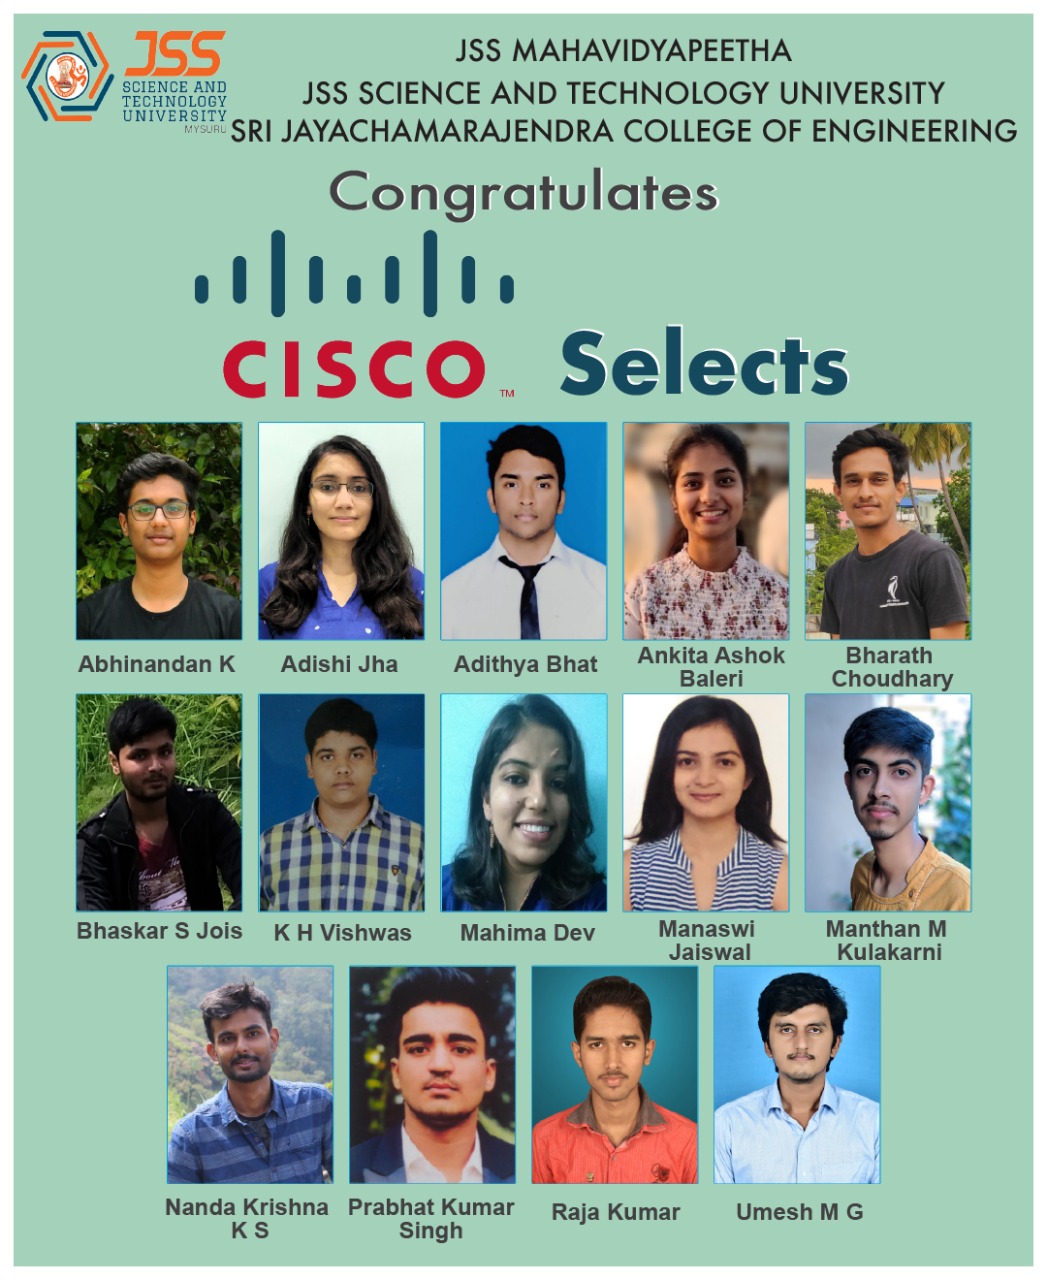 University congratulates students for being placed at CISCO